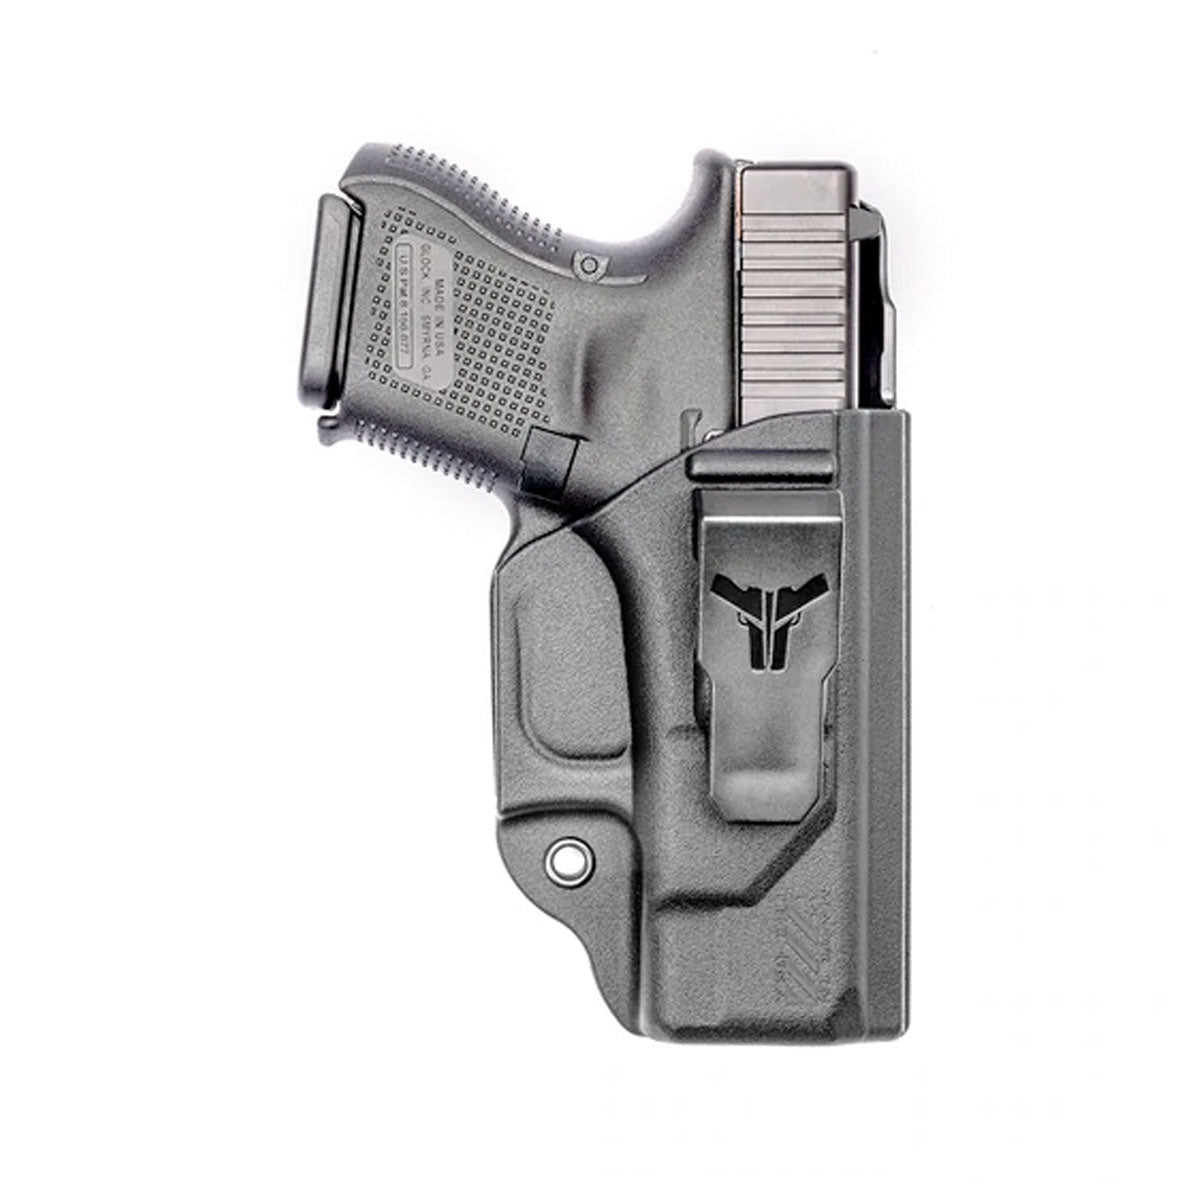 Blade-Tech Klipt IWB Holster Black Right Hand Only Holsters Blade-Tech Holsters Glock 26/27 Tactical Gear Supplier Tactical Distributors Australia